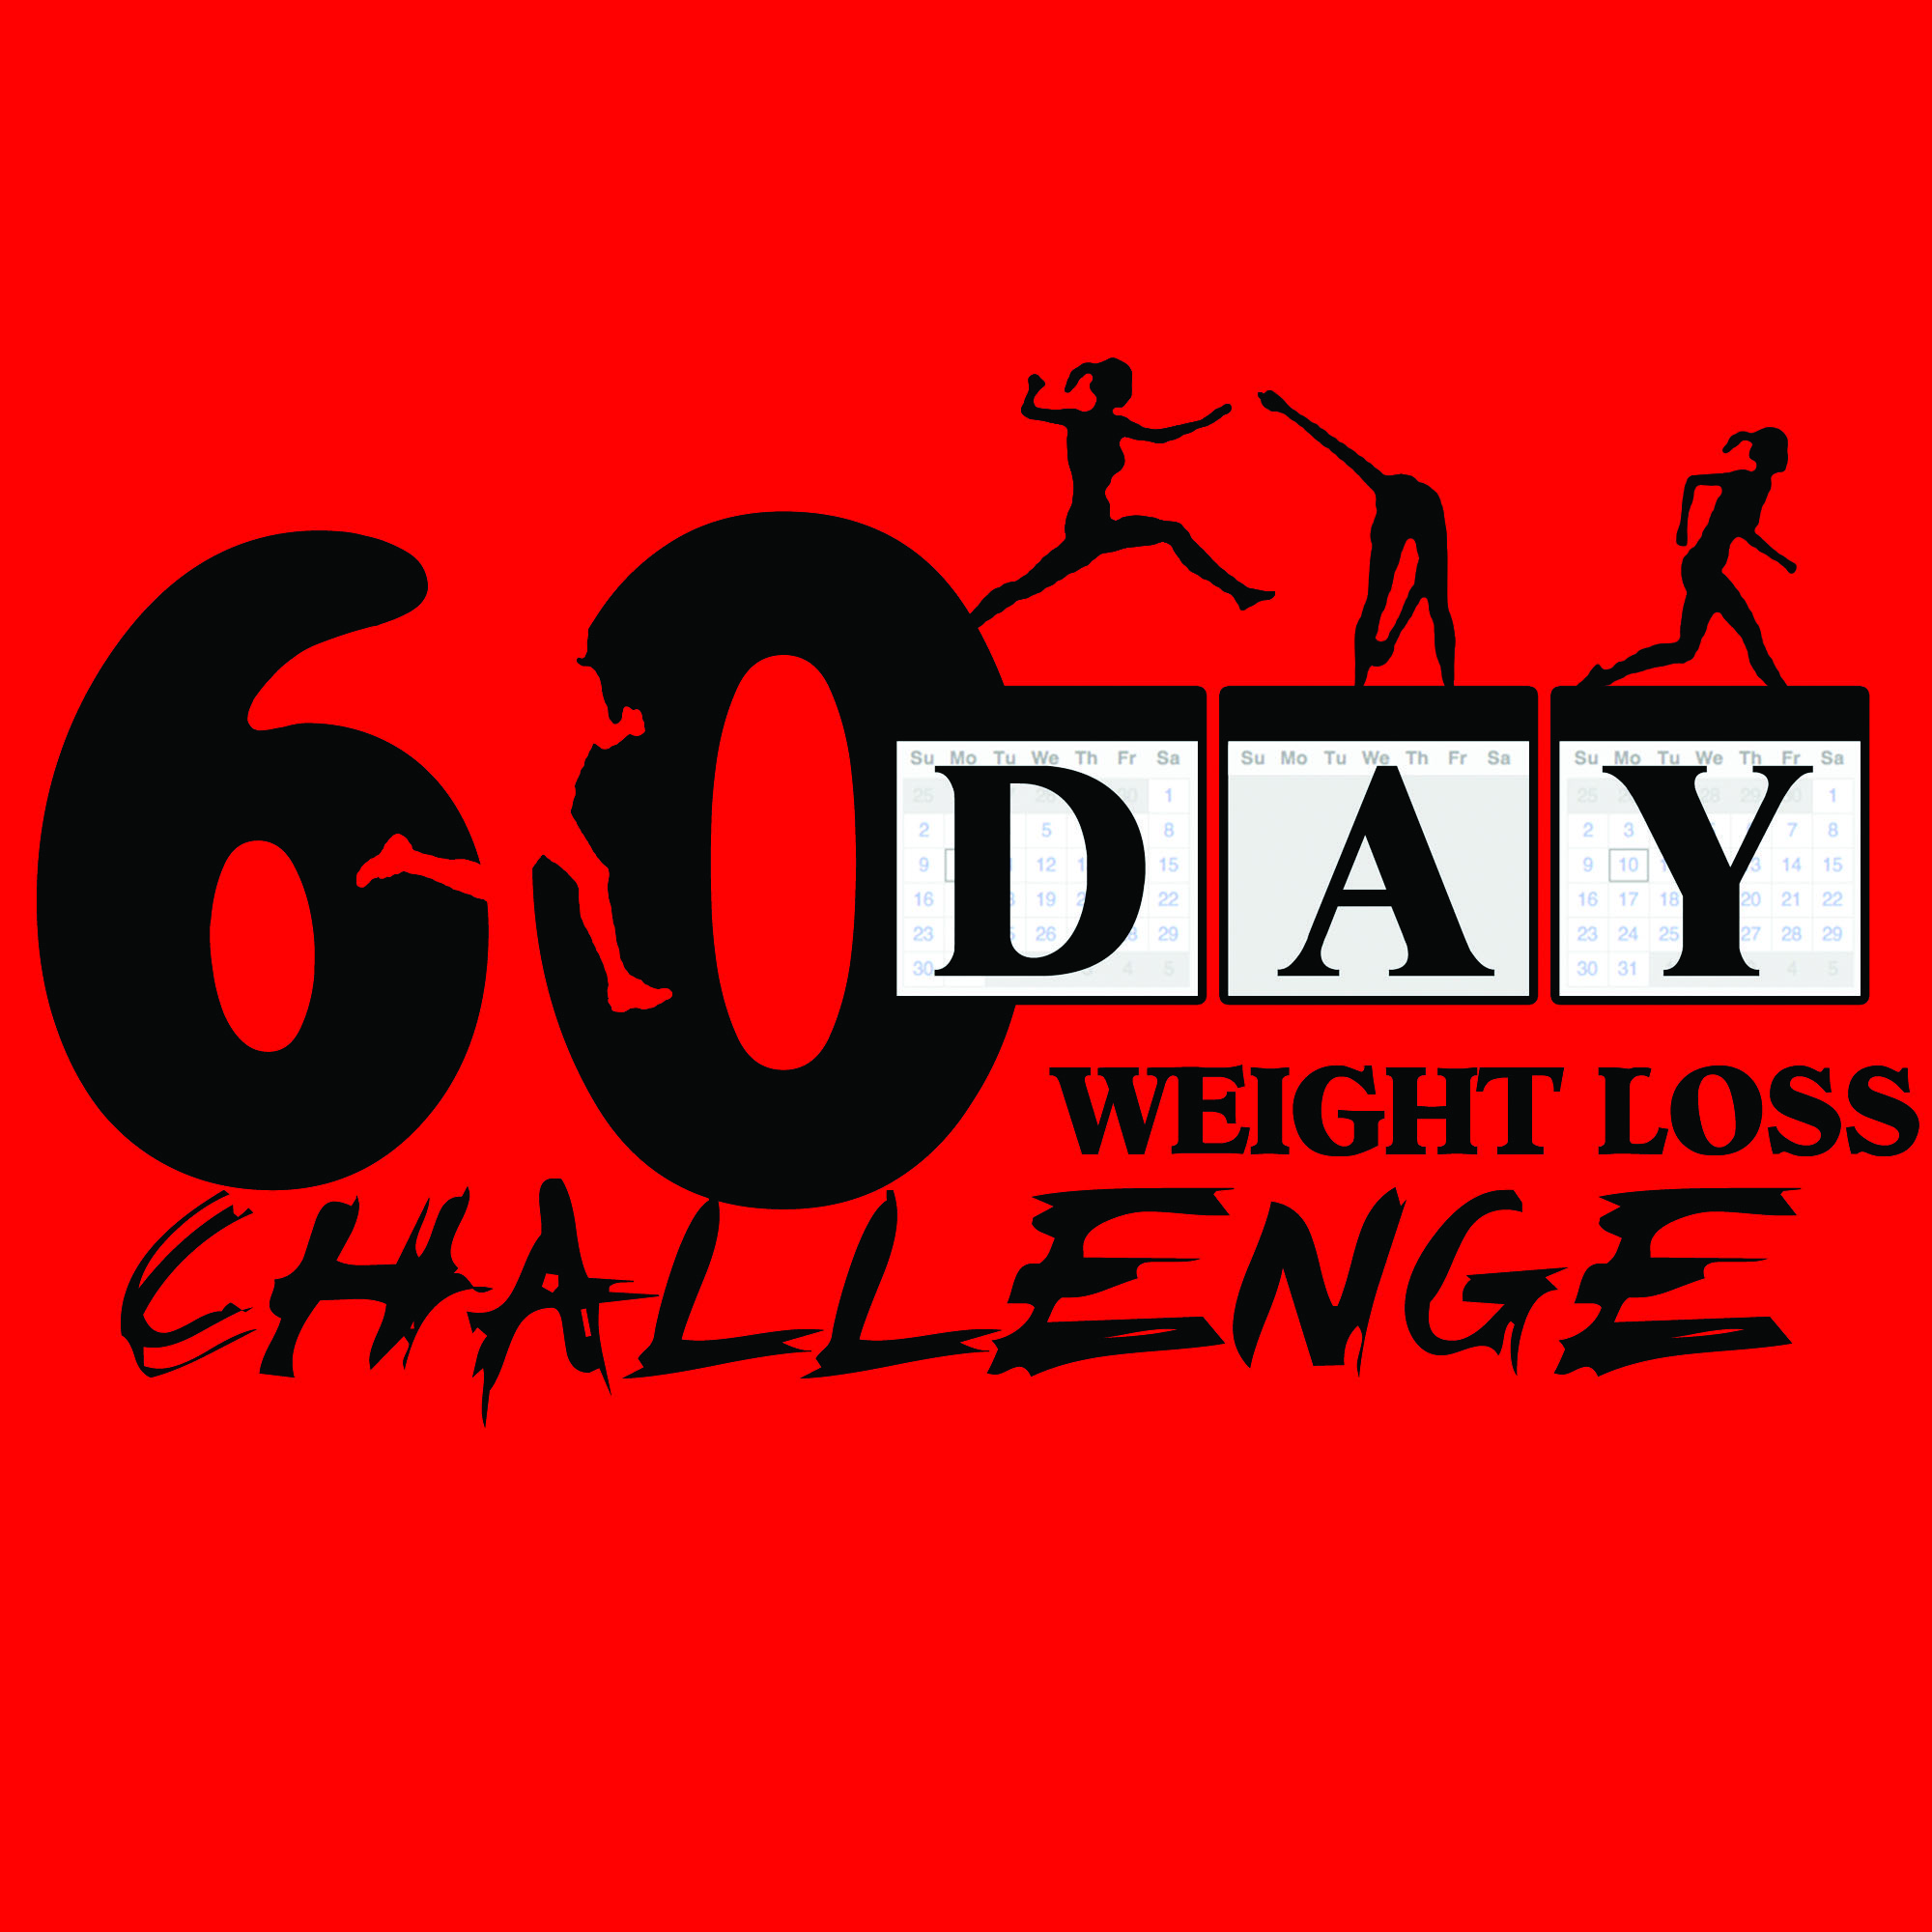 60 Days to Fit!    by Nidaa Hossenlopp